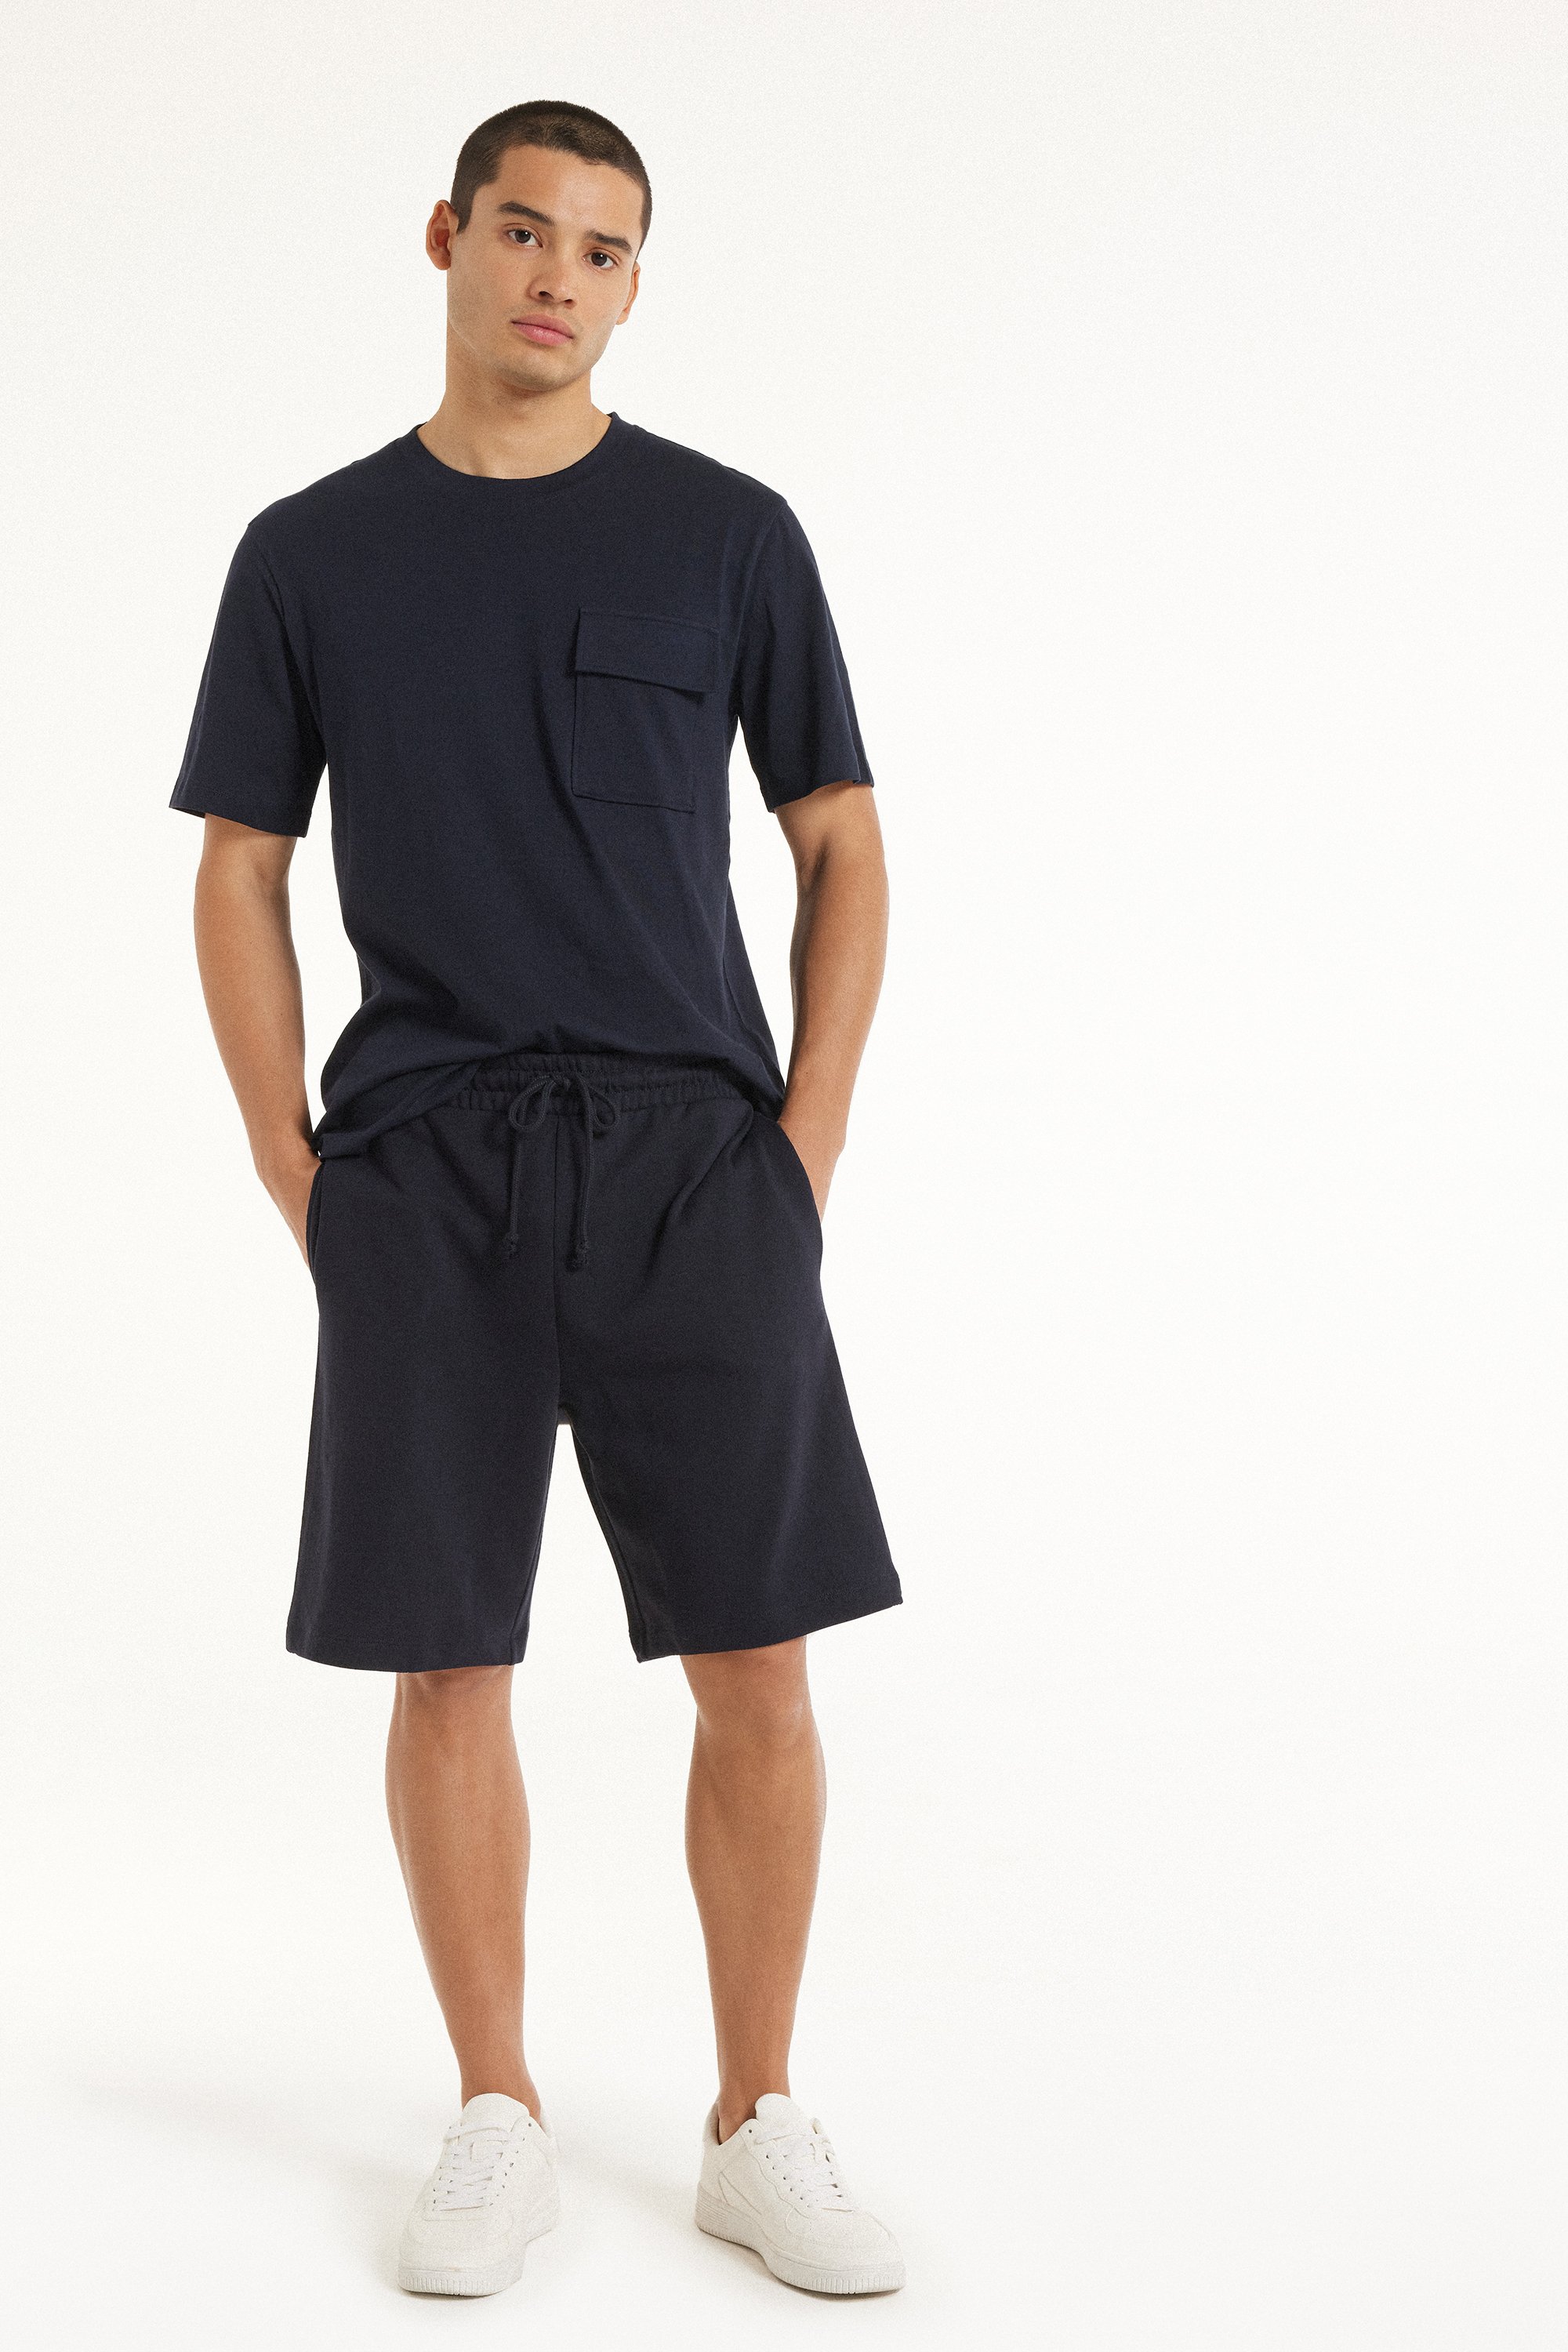 Cotton Fleece Shorts with Pockets